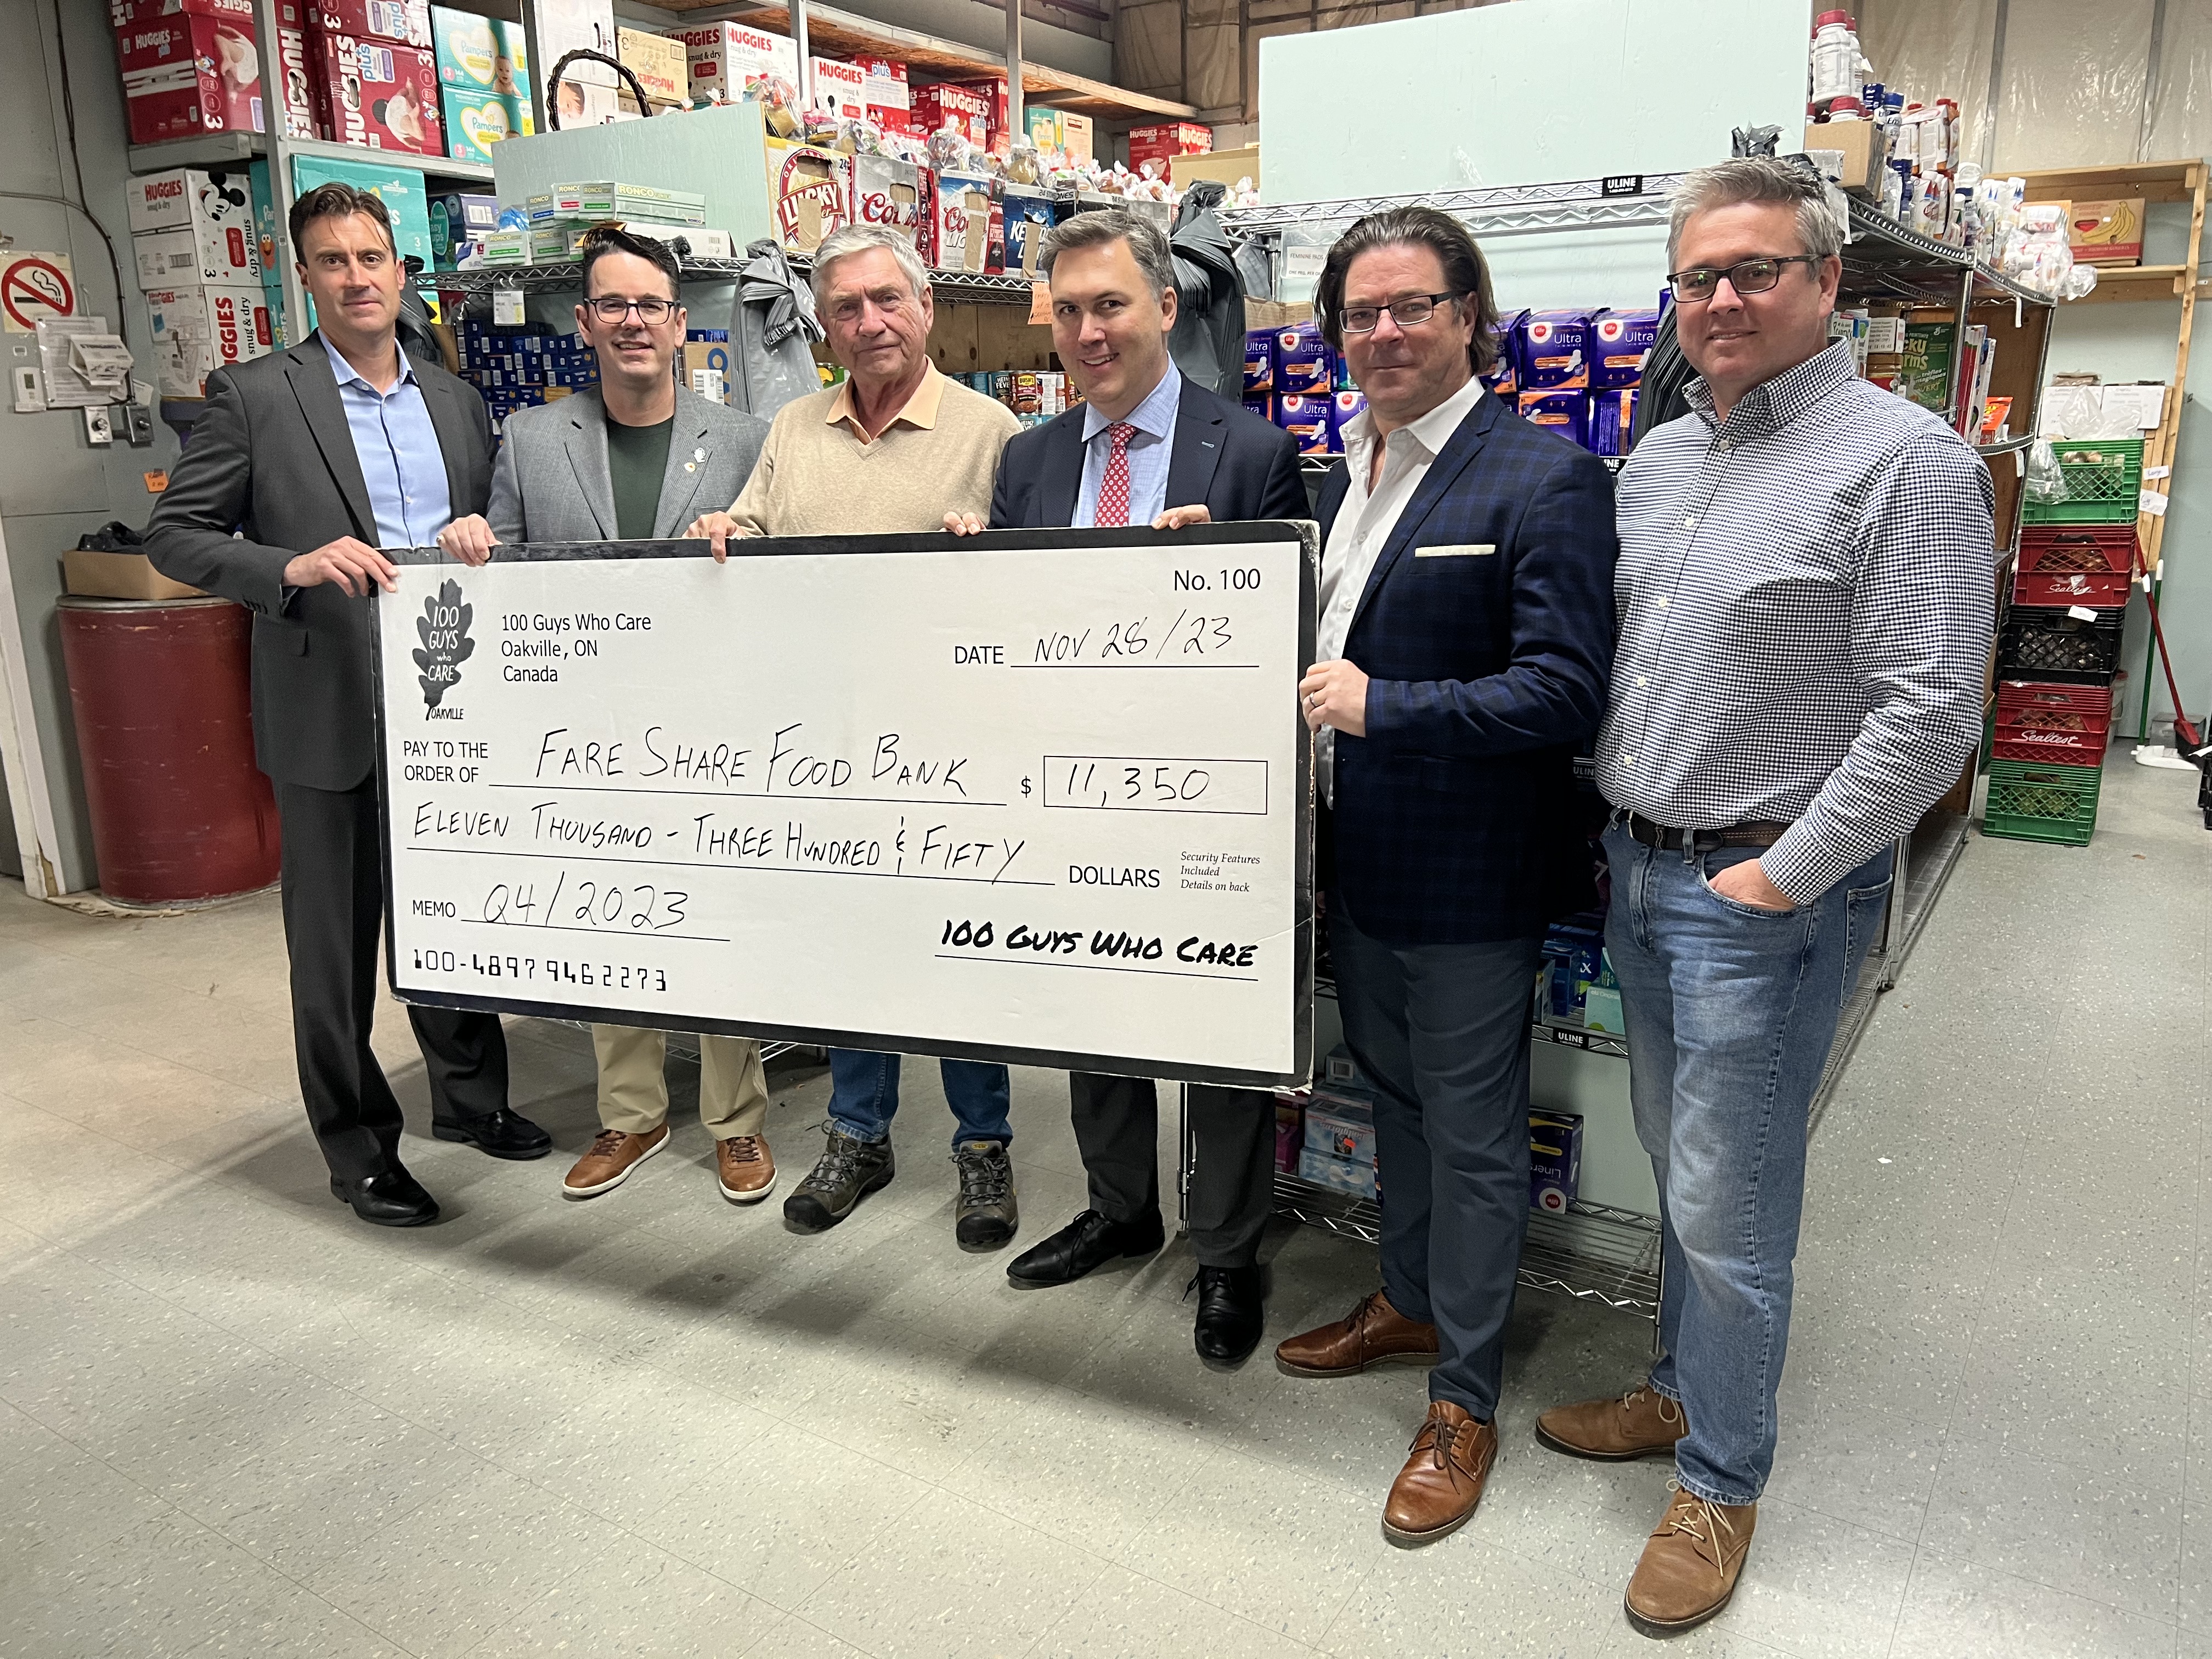 Committee members of 100 Guys Who Care Oakville (Chris Chapman, Ian Pedersen, Jeff Percival, Mike Klink and Chris Foulon) presented the cheque to Fare Share Food Bank volunteer president Steve Rowe. | Oakville News N.M.